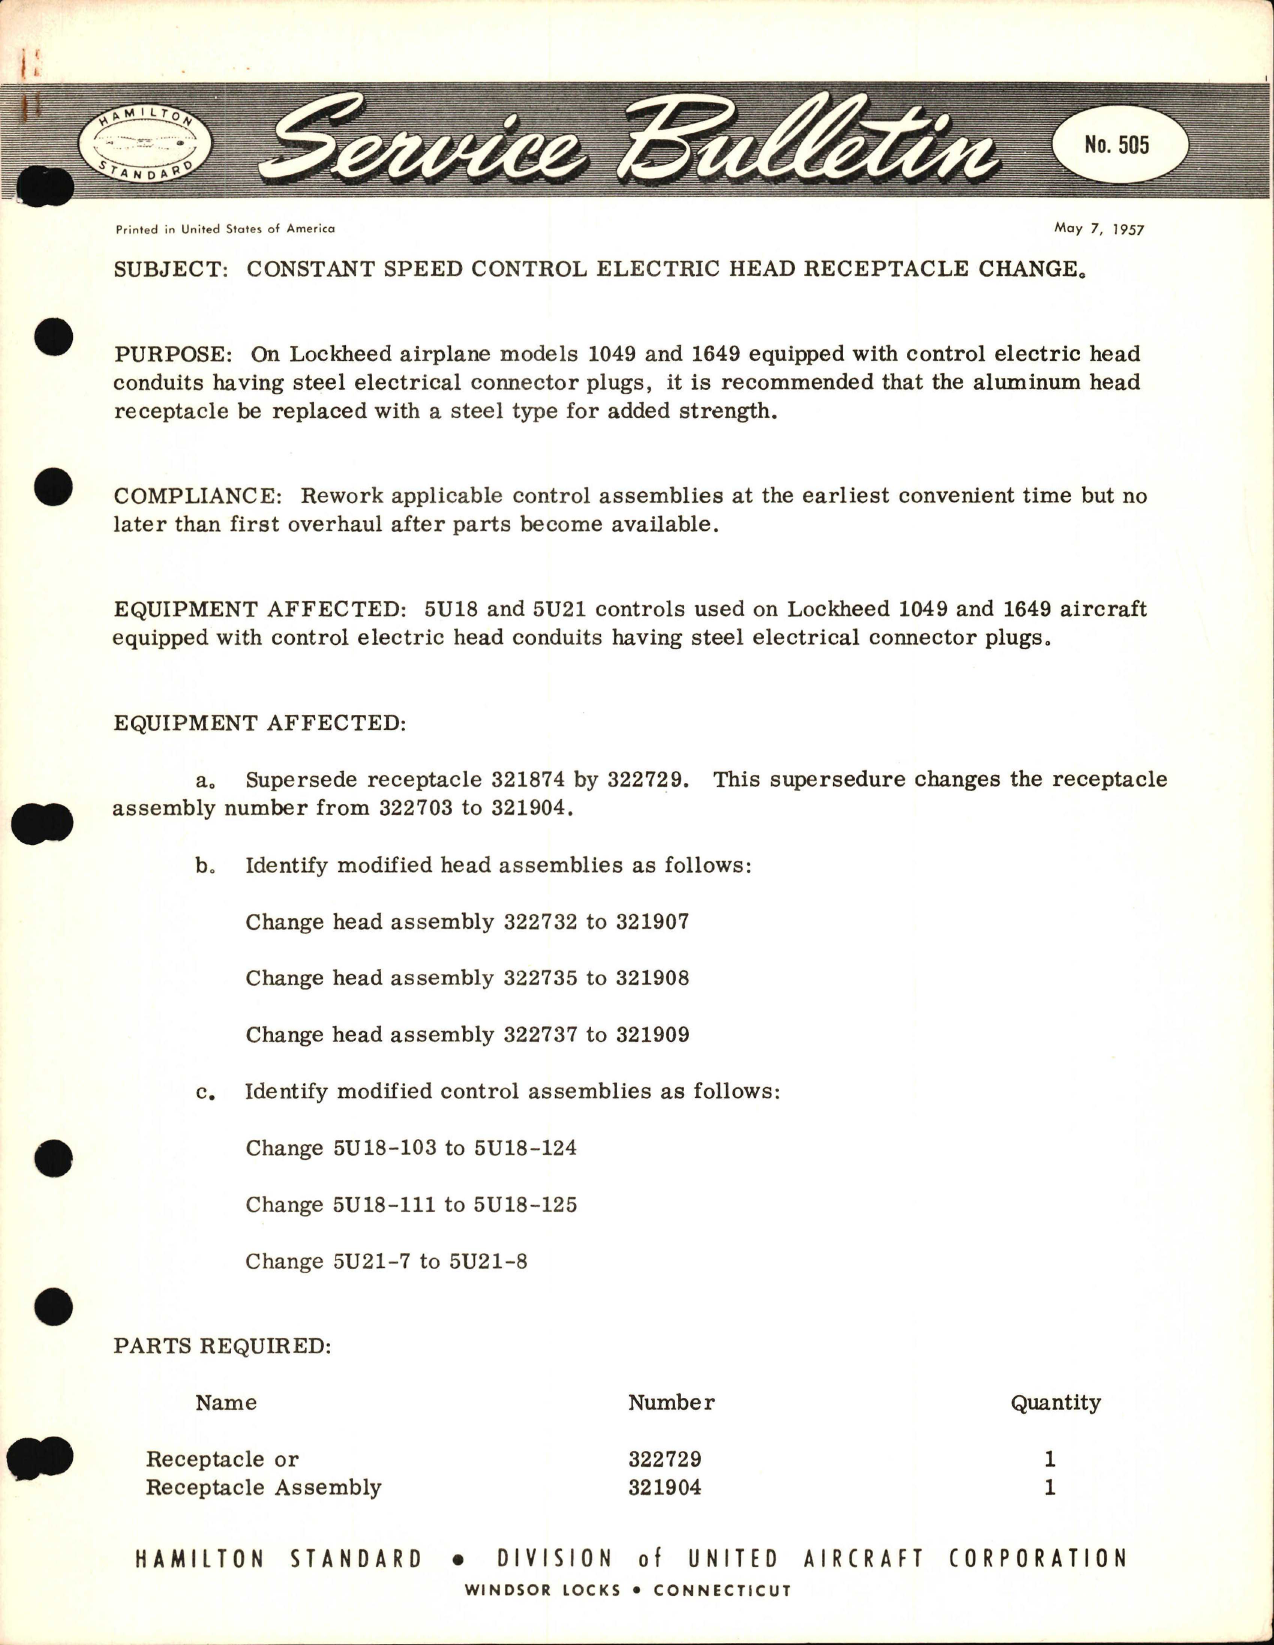 Sample page 1 from AirCorps Library document: Constant Speed Control Electric Head Receptacle Change